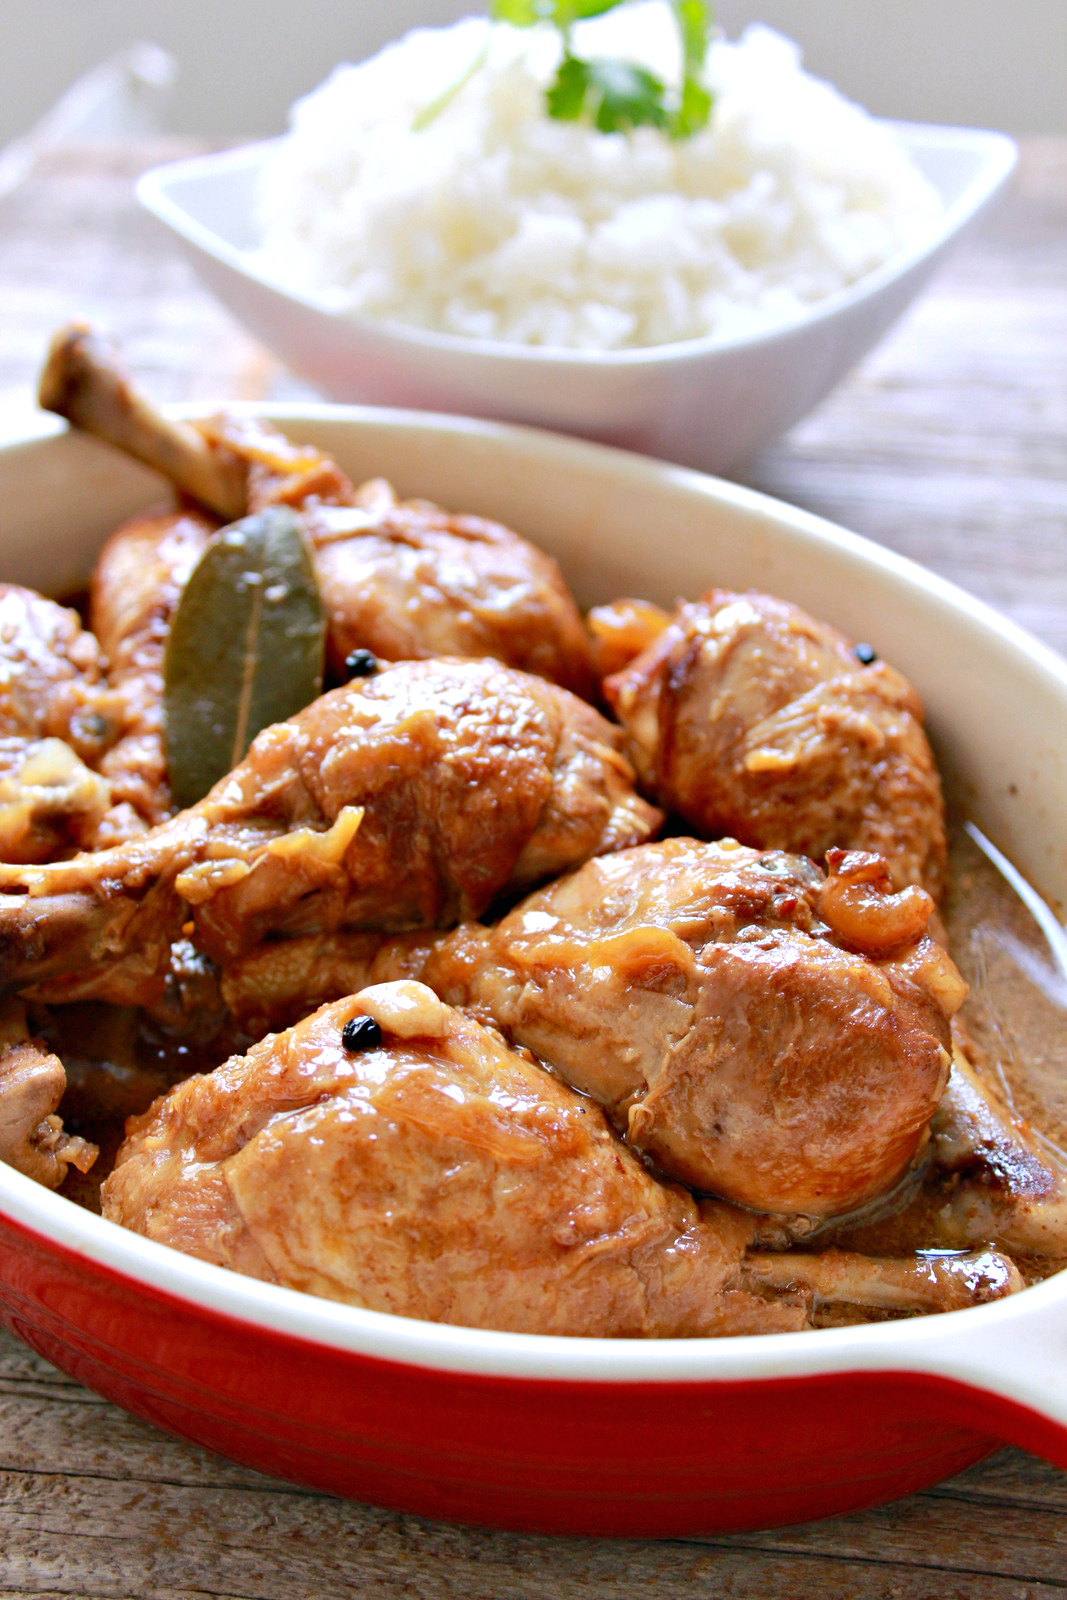 The classic Filipino dish - Chicken Adobo - marinated in vinegar, soy sauce, peppercorns and garlic then cooked in the pressure cooker (instant pot). Easy-peasy deliciousness!